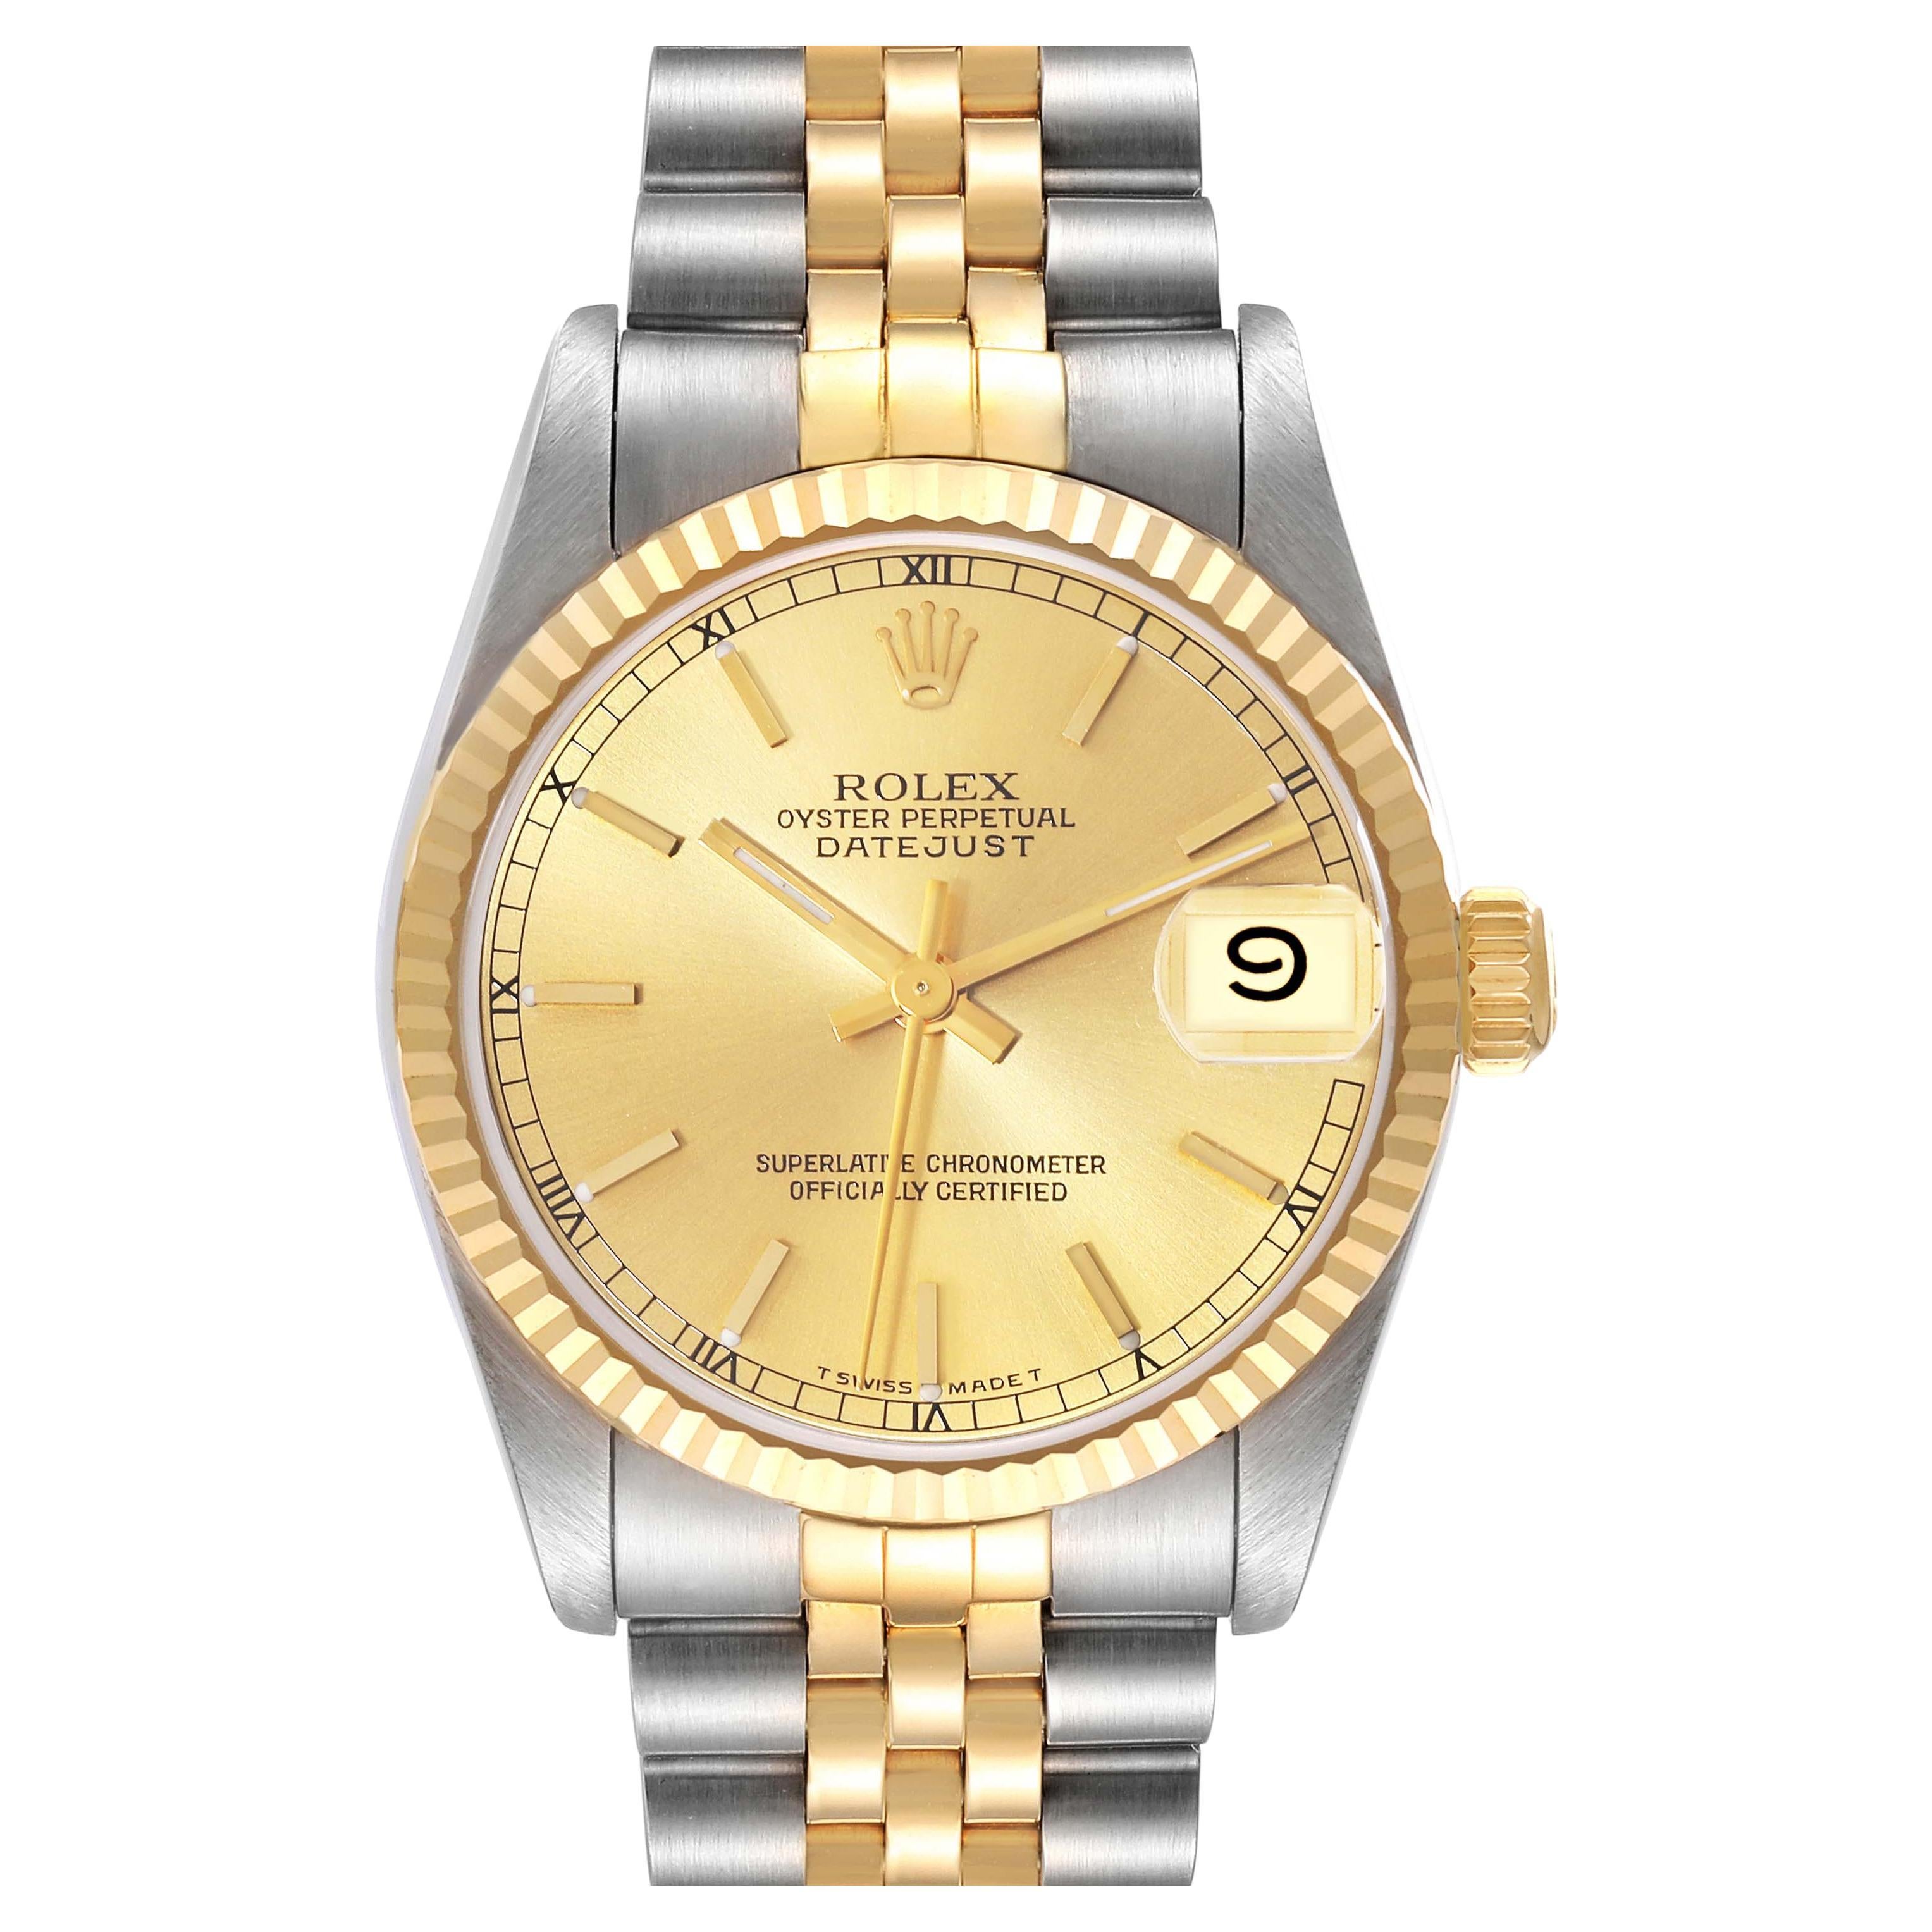 Rolex Datejust Midsize Champagne Dial Steel Yellow Gold Ladies Watch 68273